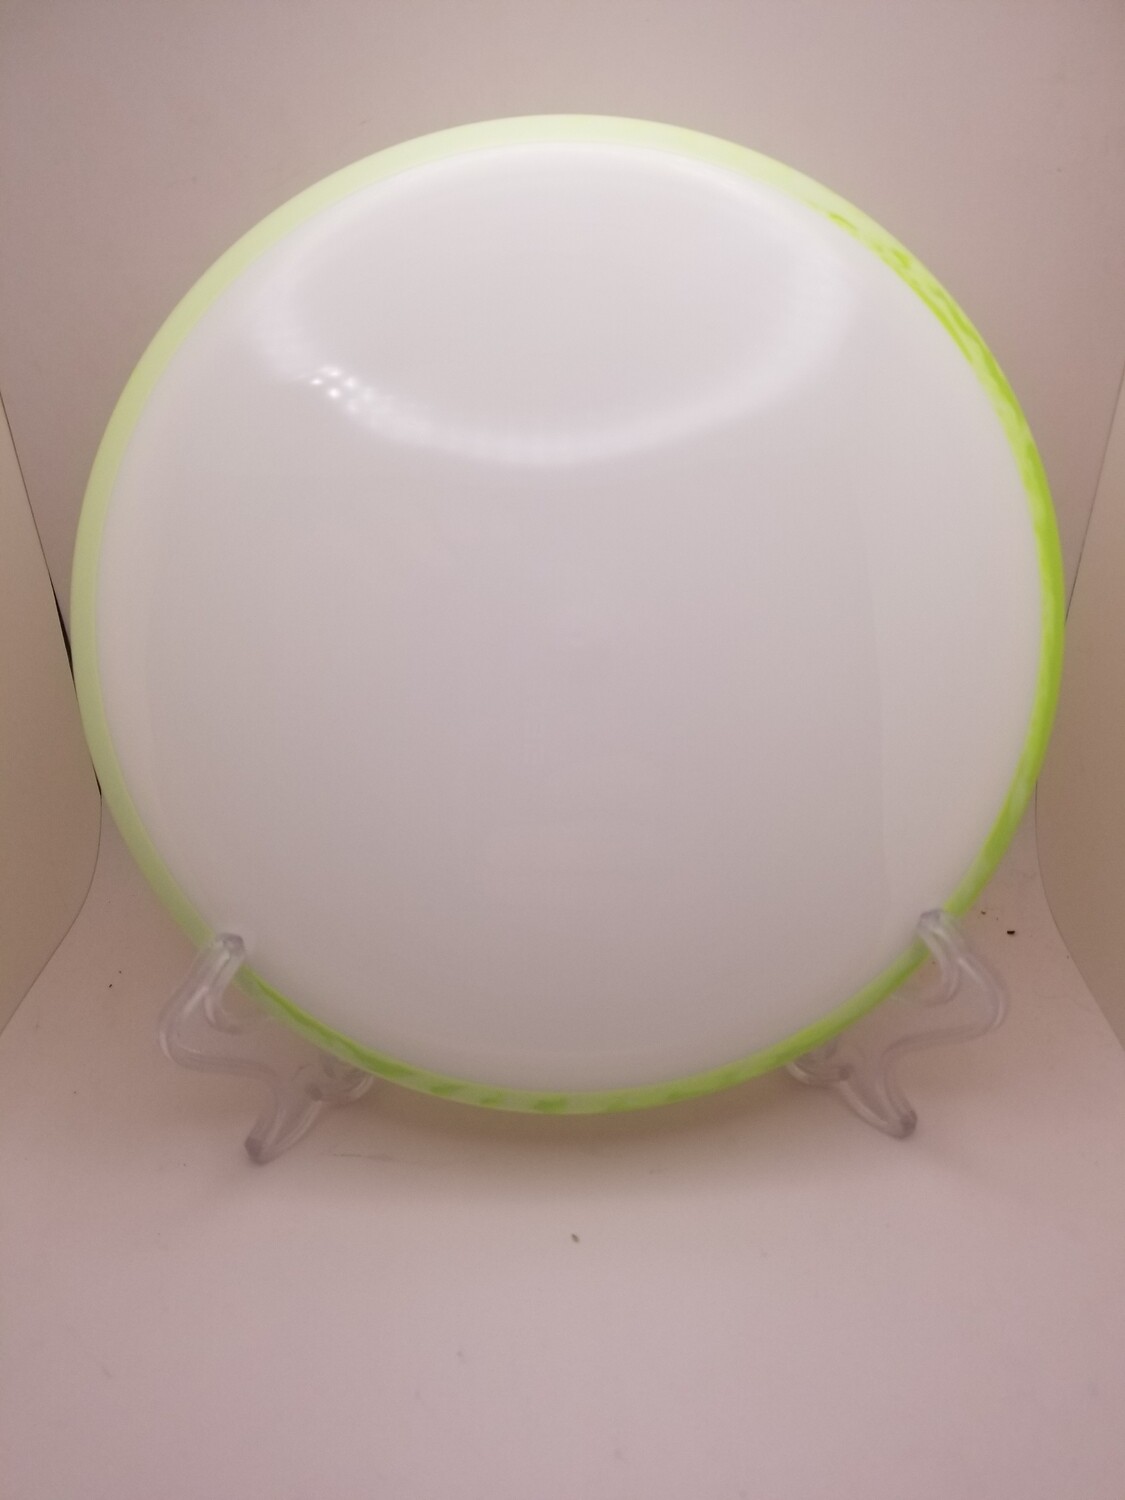 Dyers Delight Axiom Discs Hex Blank White Plate with Swirly Green Rim 176-178g